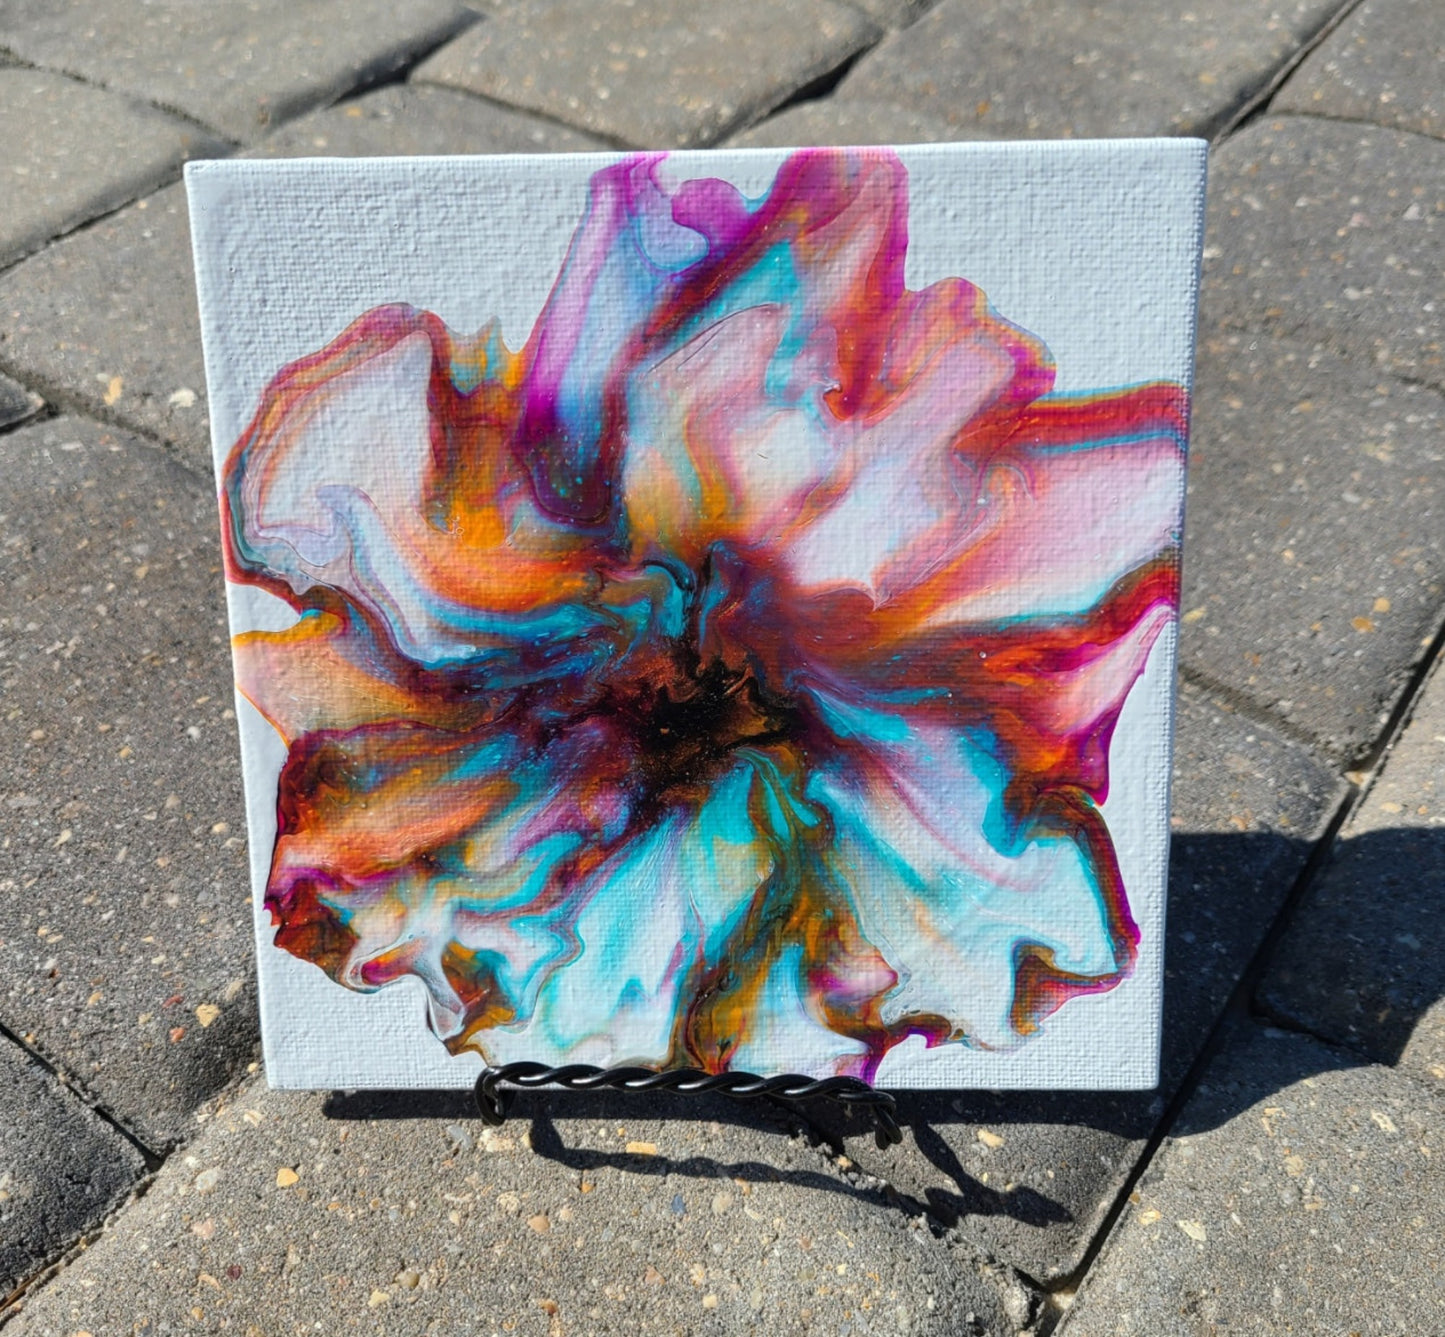 I recently did this little bloom that I named "Coppery Bloom", but it has so many more colors in it.  Petals of turquoise, purple, orange, black and copper on a white background.  Created on a thin Artist Panel.  Comes with the small twisted wire easel as shown to sit about your home or can be easily put into a frame.  6 x 6 inches